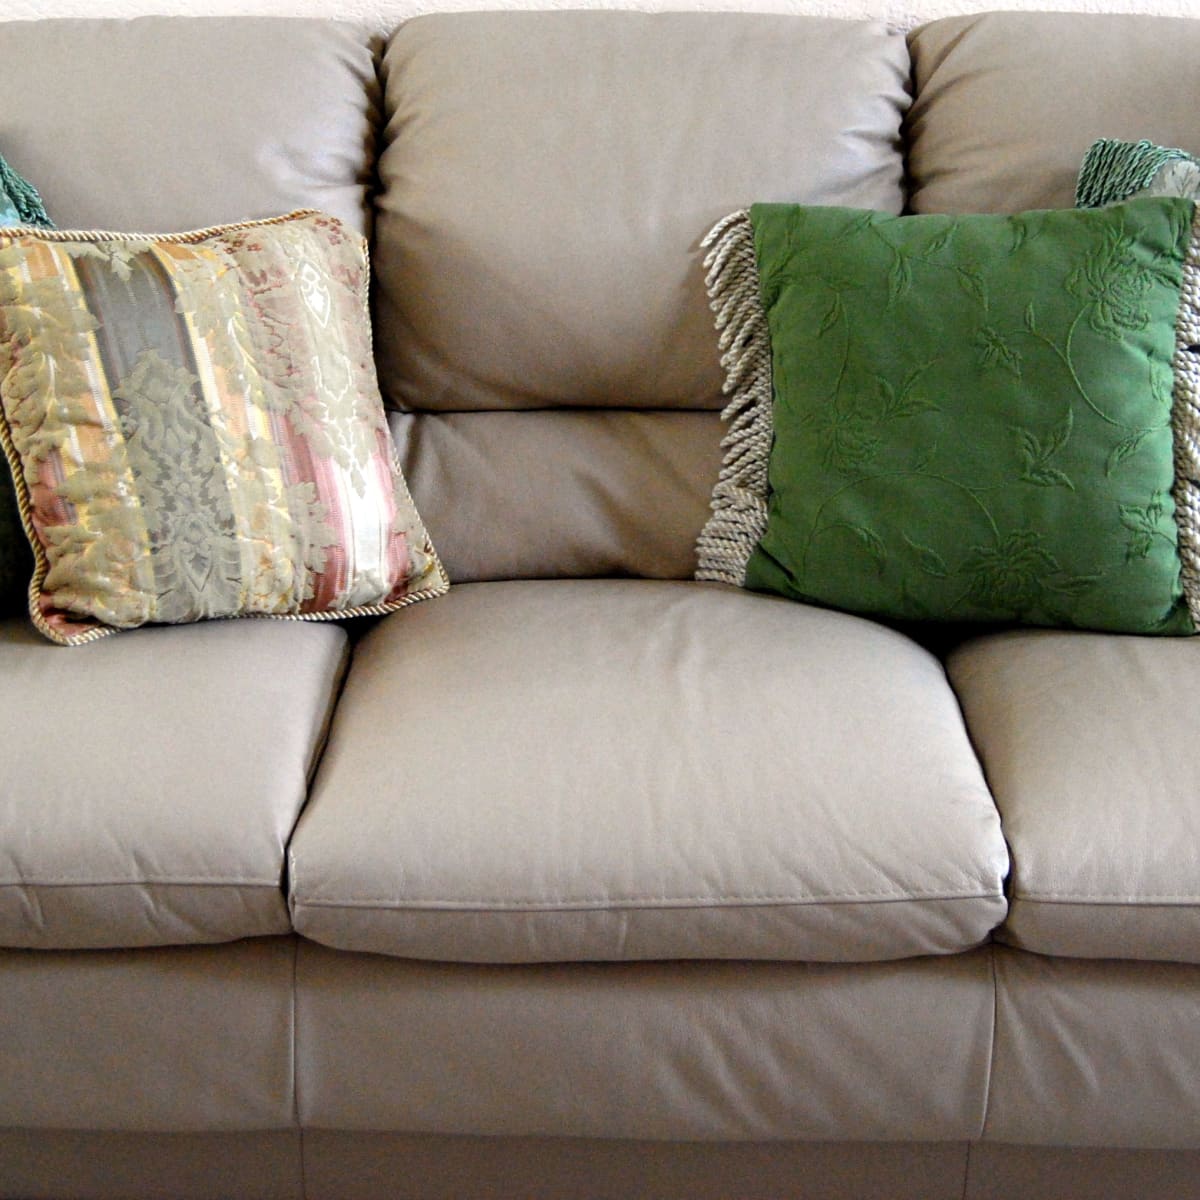 How To Patch A Microfiber Couch: 2 Easy Methods - Craftsonfire